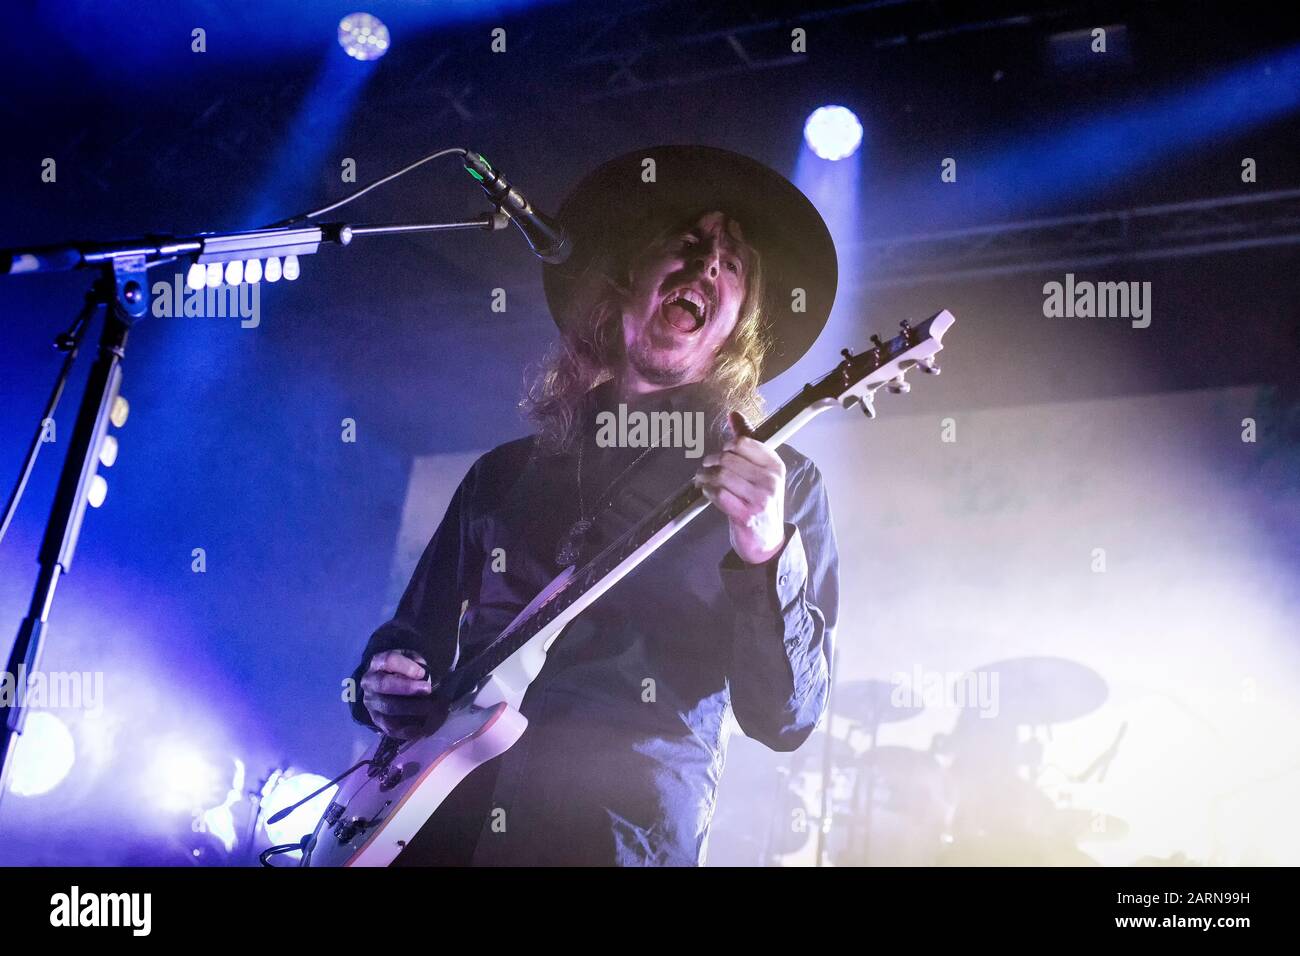 Norway, Oslo. 12th, January 2020. The progressive Swedish death metal band Opeth performs a live concert at Sentrum Scene in Oslo. Here vocalist and guitarist Mikael Åkerfeldt is seen live on stage. (Photo credit: Gonzales Photo - Terje Dokken). Stock Photo